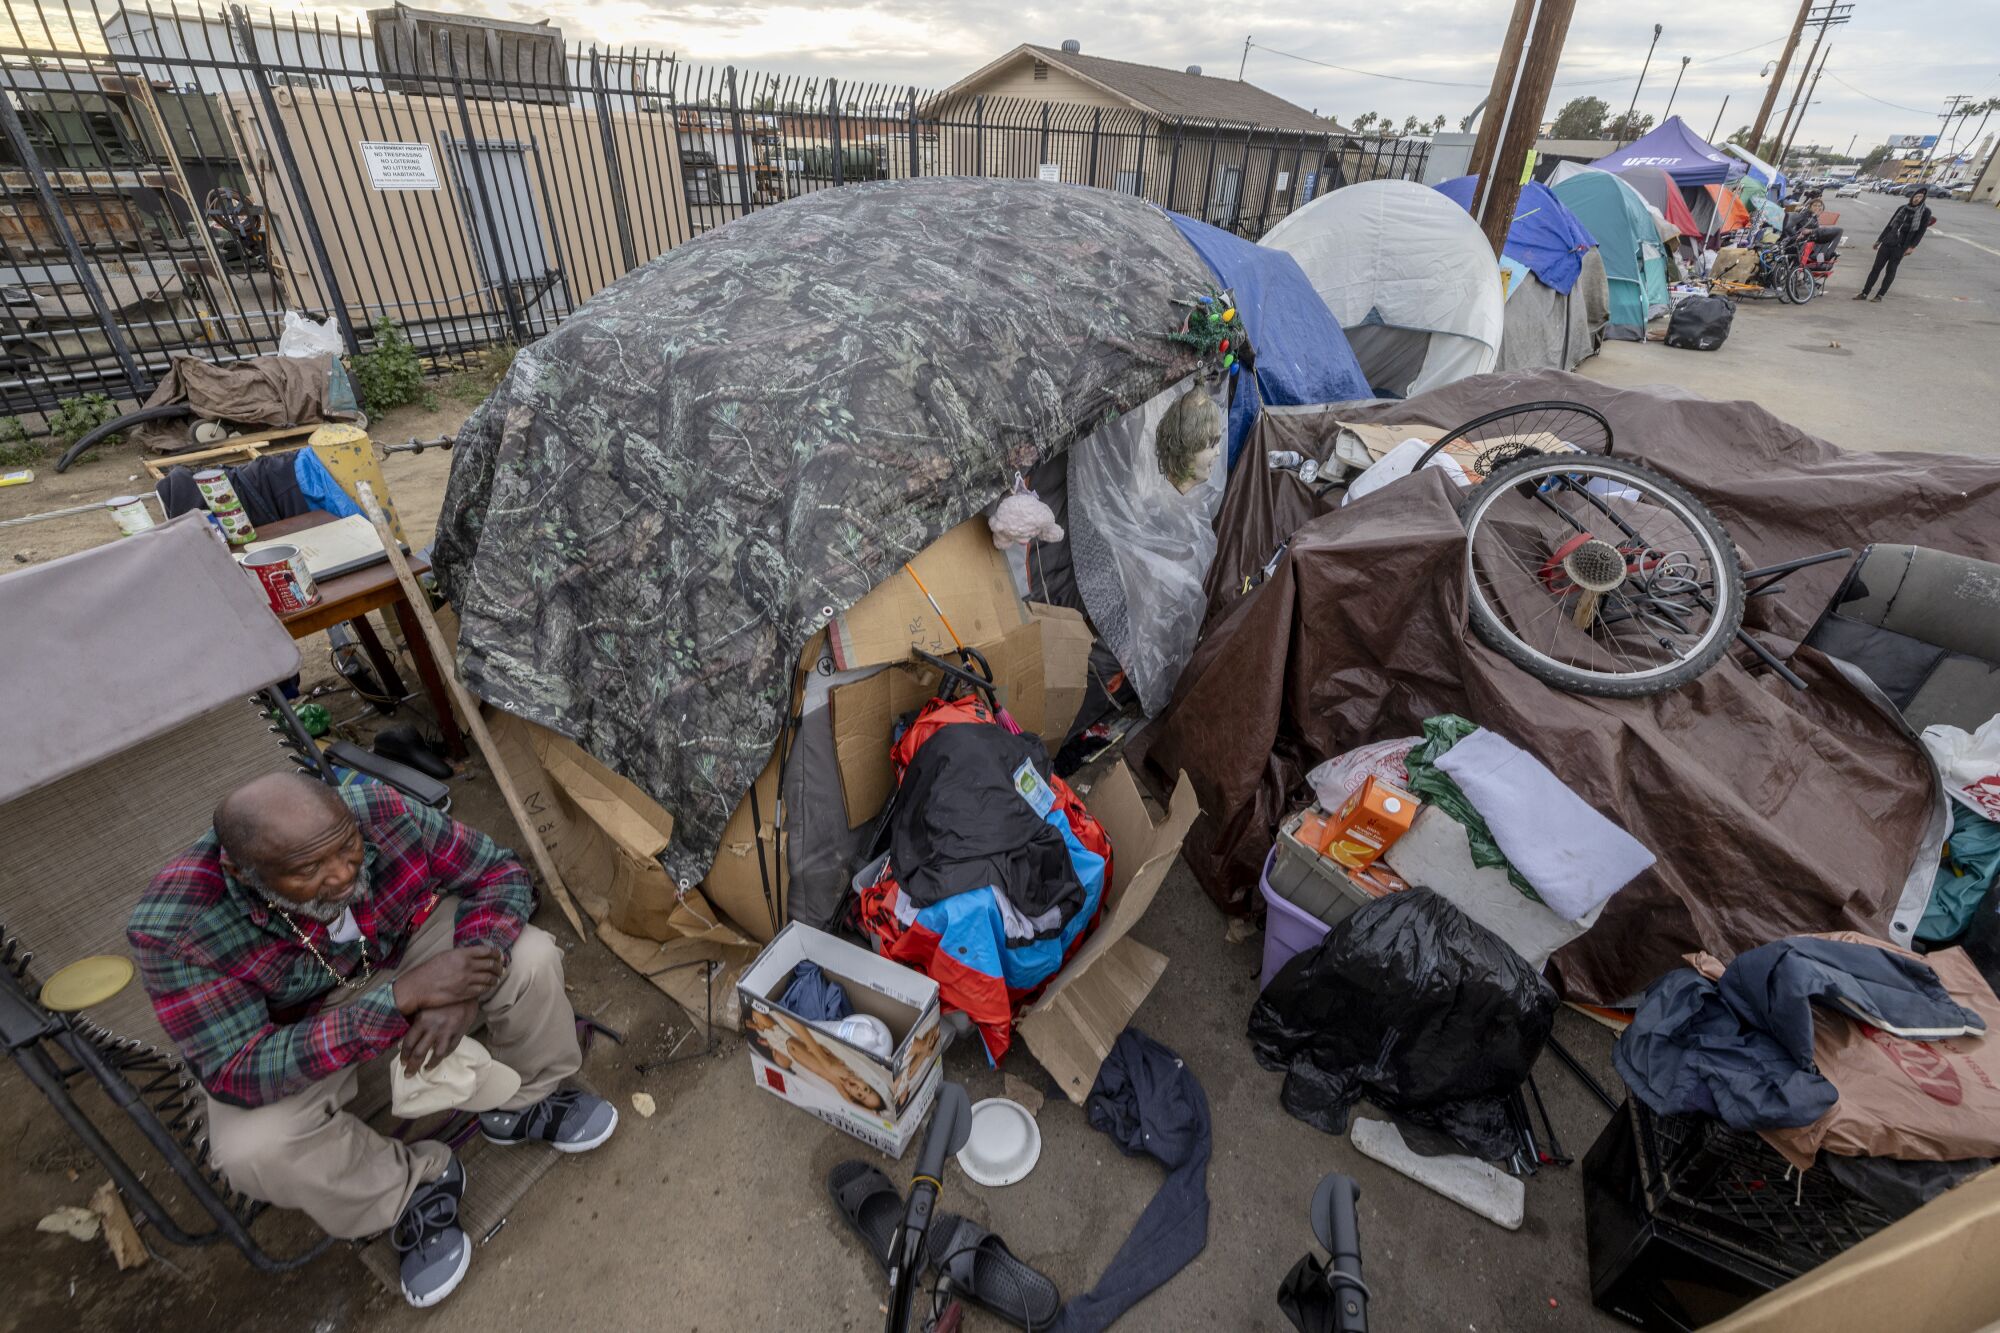 A 61-year-old homeless man sits next to his tent at a homeless encampment on Sports Arena Boulevard in San Diego.